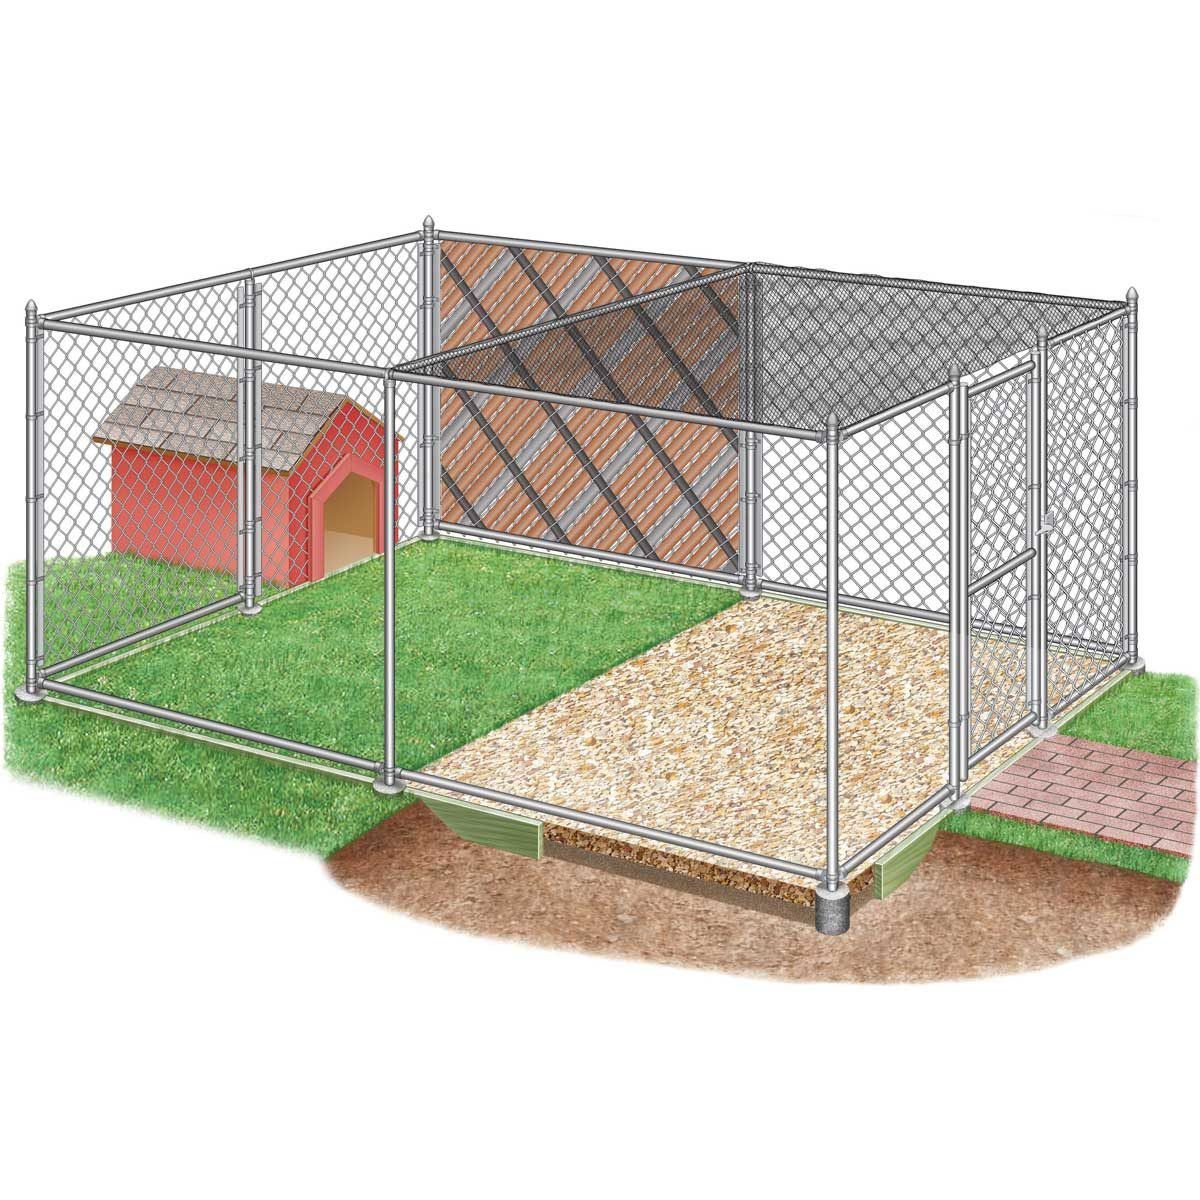 How To Build Chain Link Outdoor Dog Kennels The Family Handyman